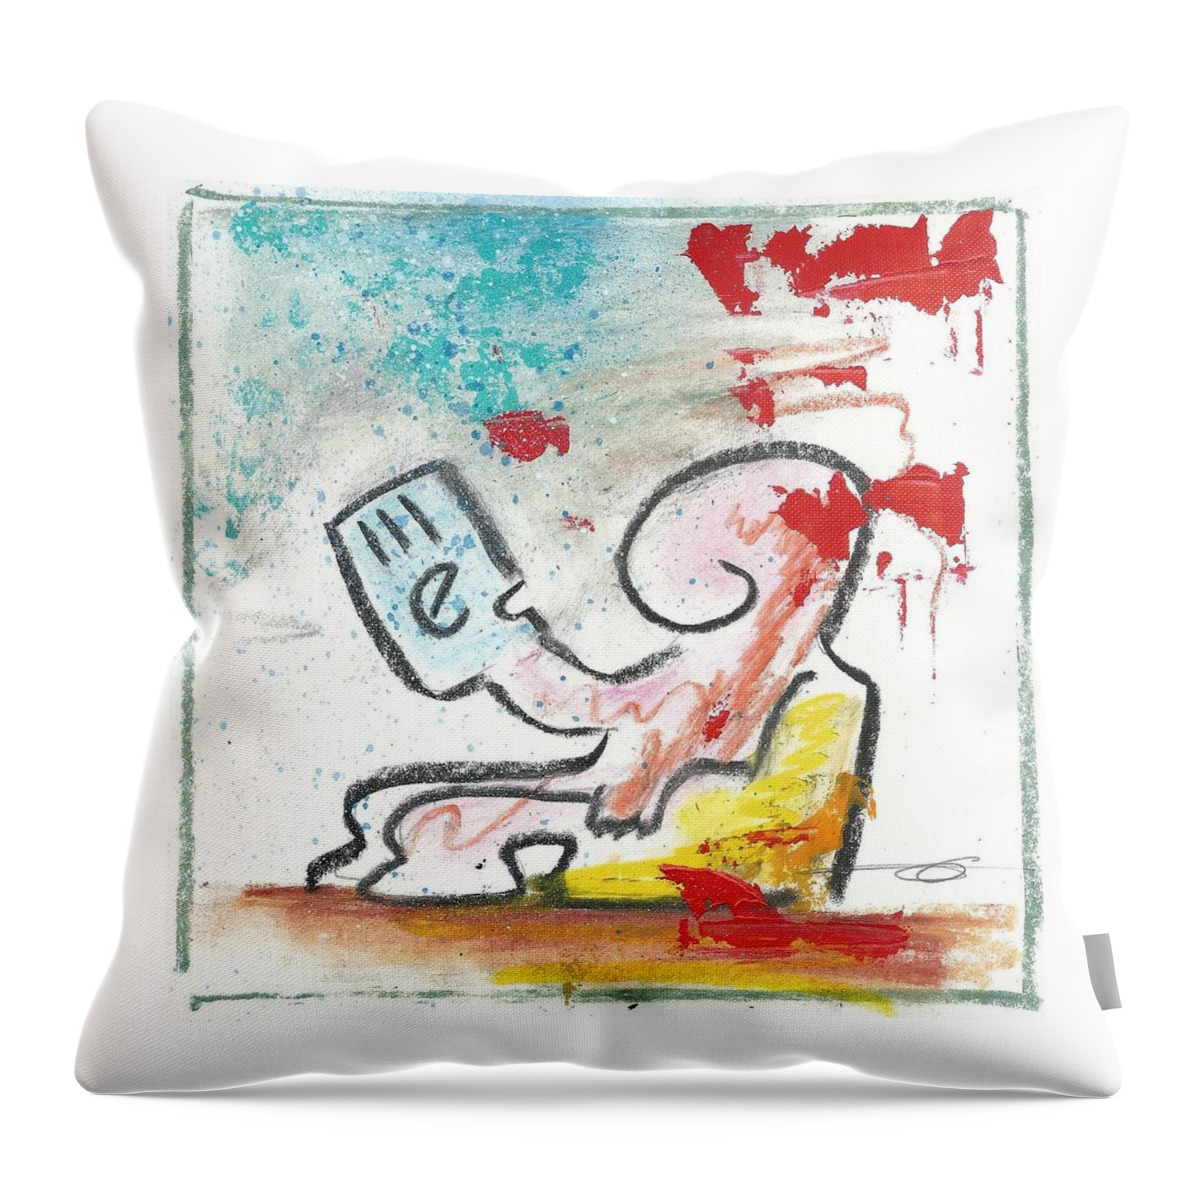 Skredch Throw Pillow featuring the mixed media Me-reader by Eduard Meinema